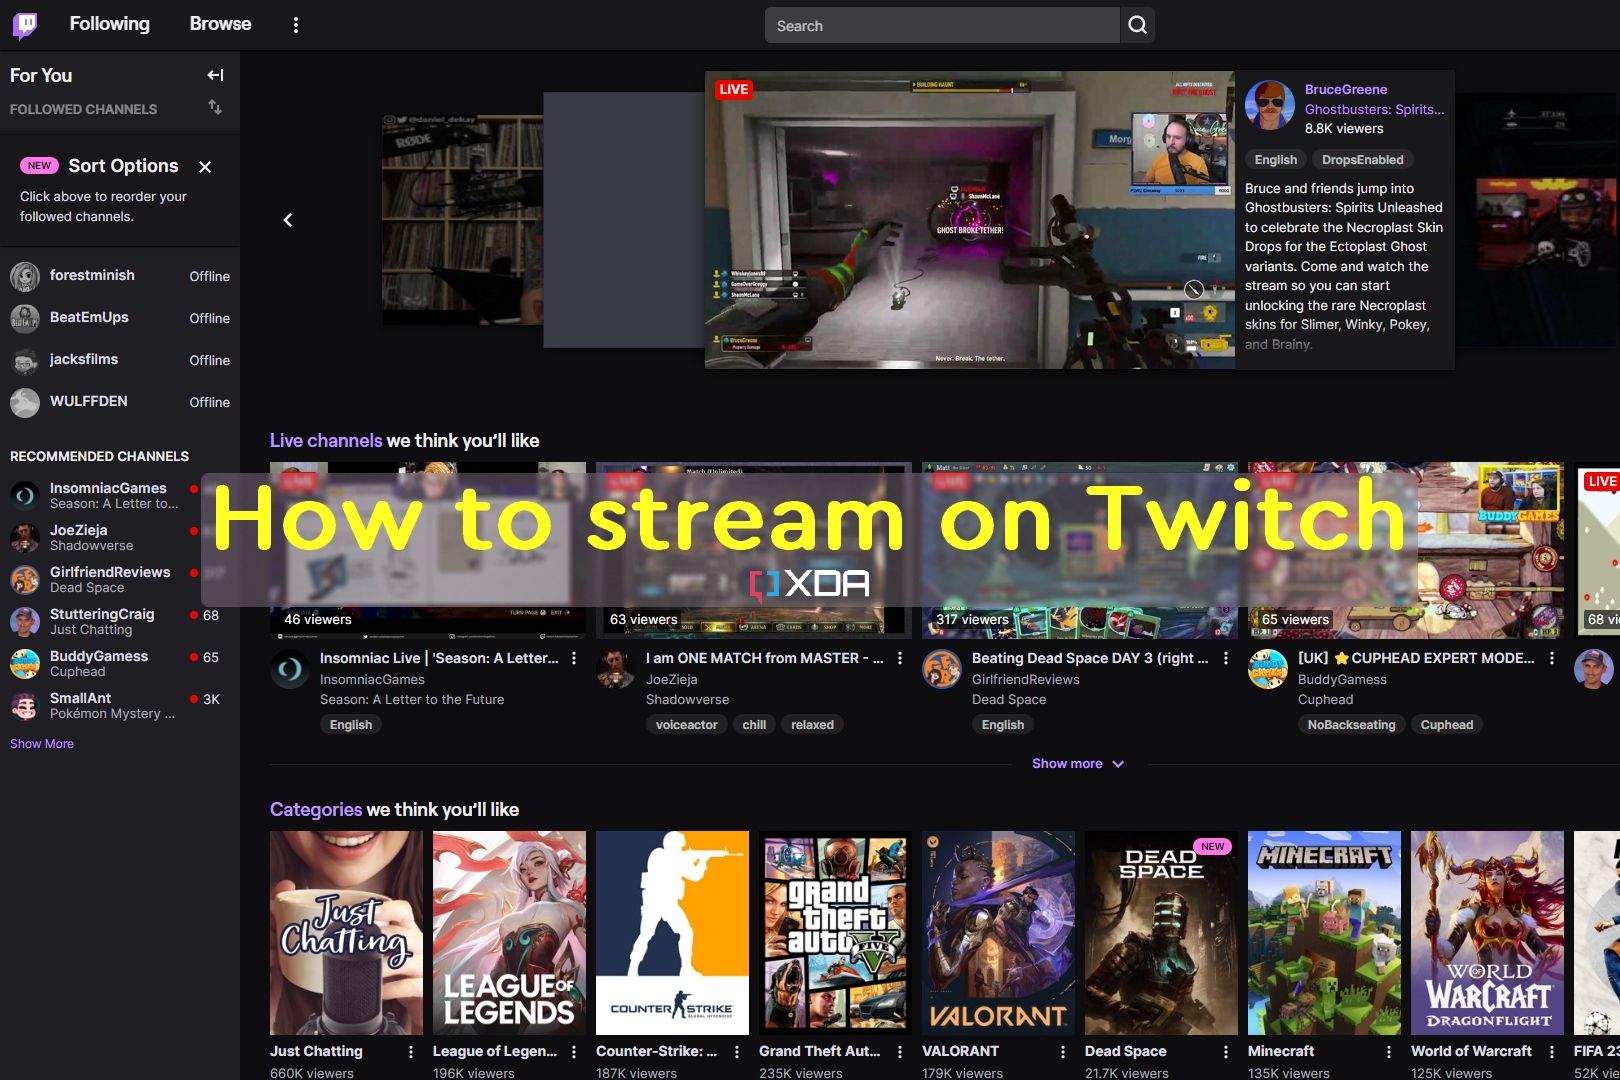 How to stream on Twitch from your Windows PC